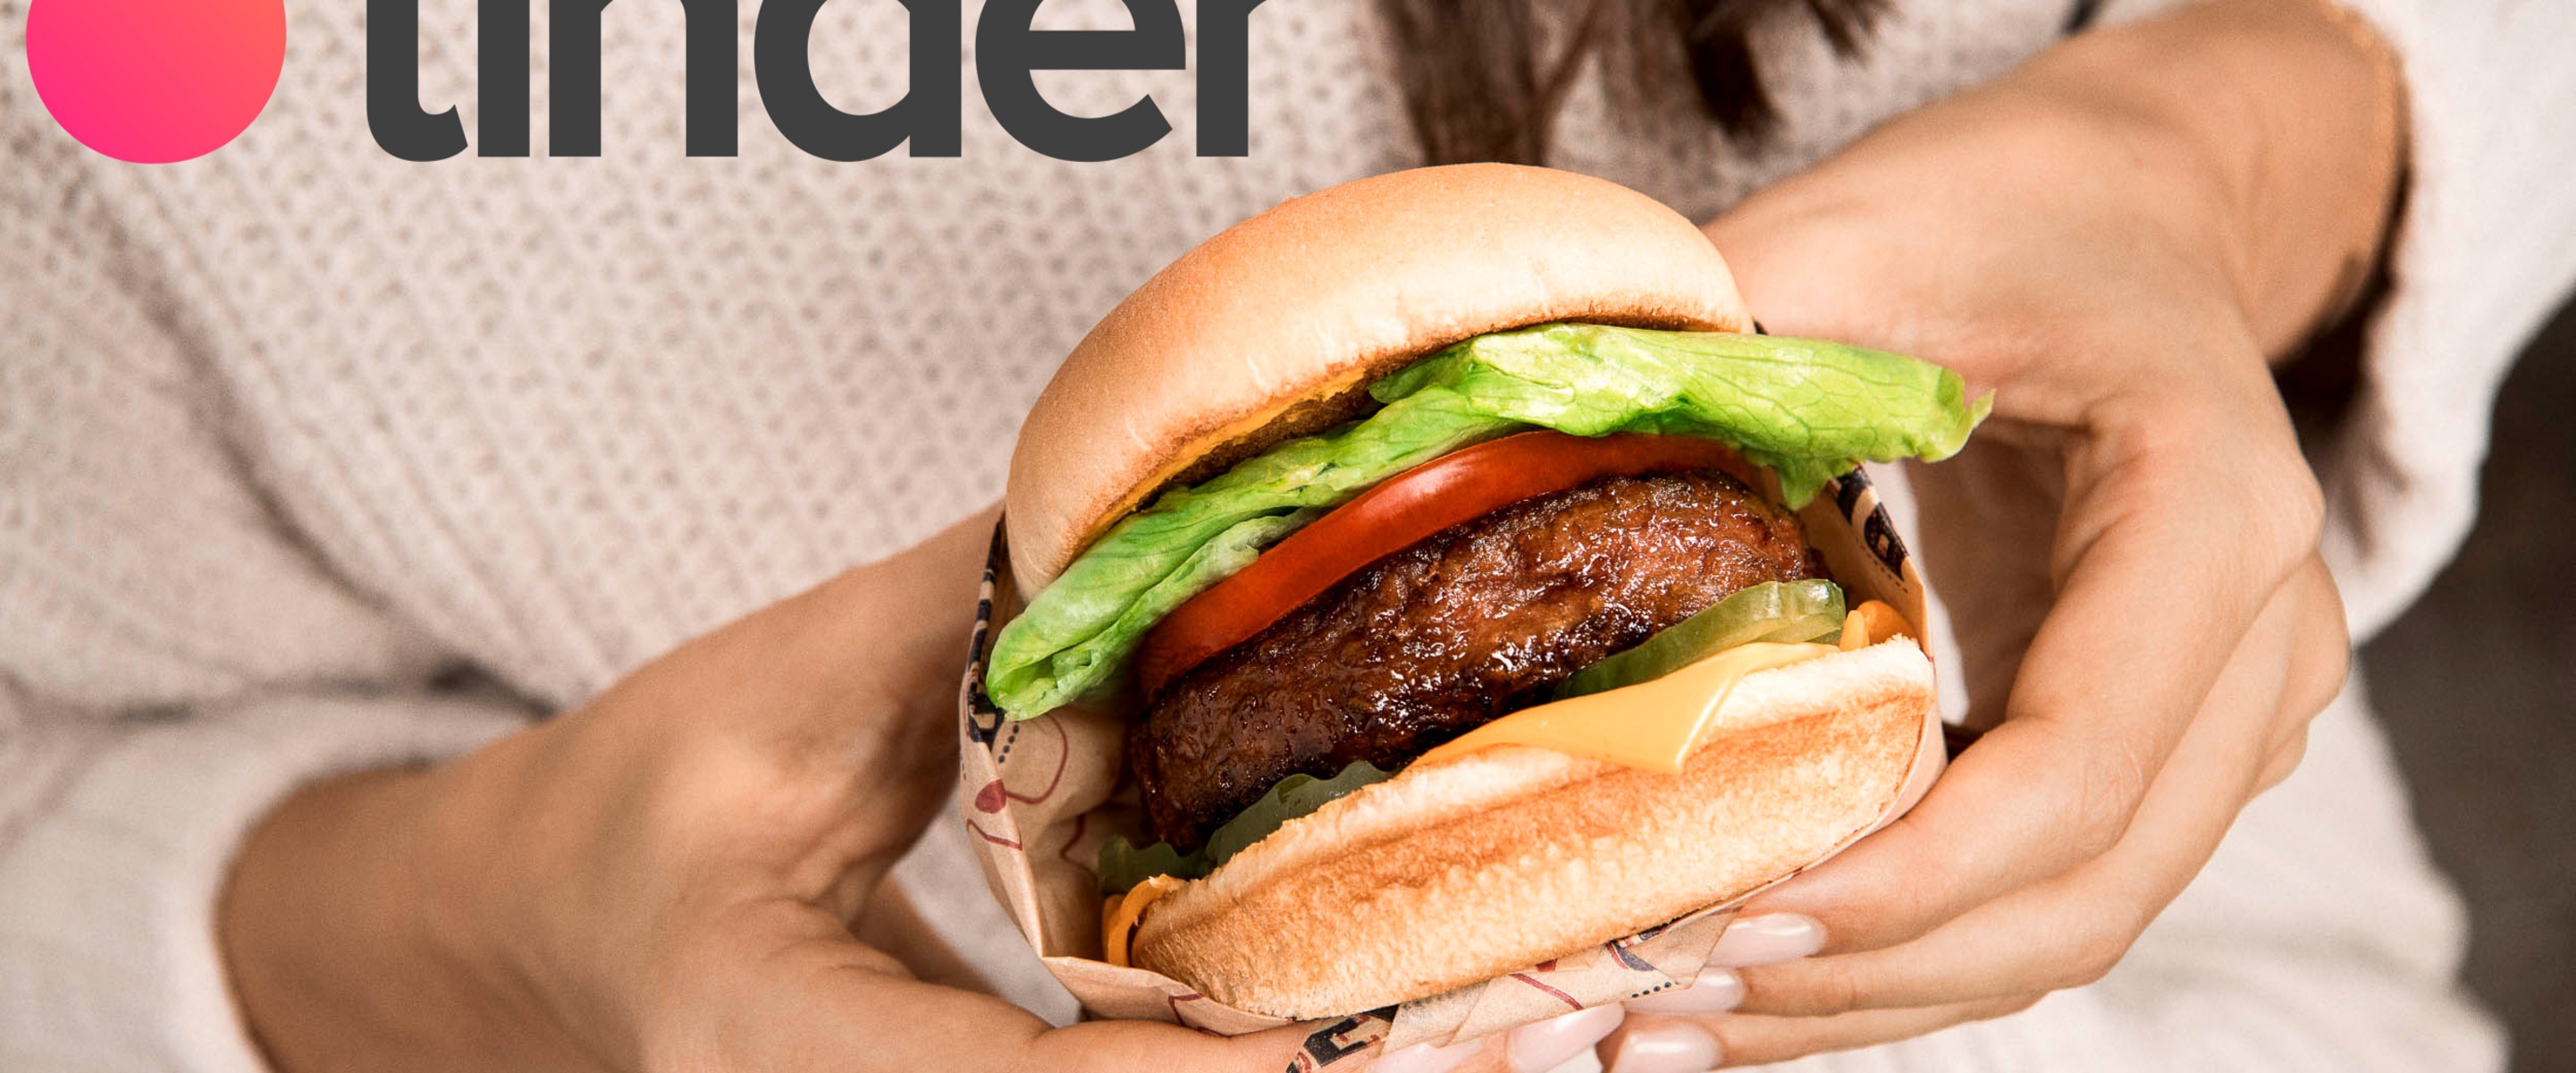 Tinder and Beyond Meat Are Sending 500 Singles on Plant-Based Dates on Earth Day